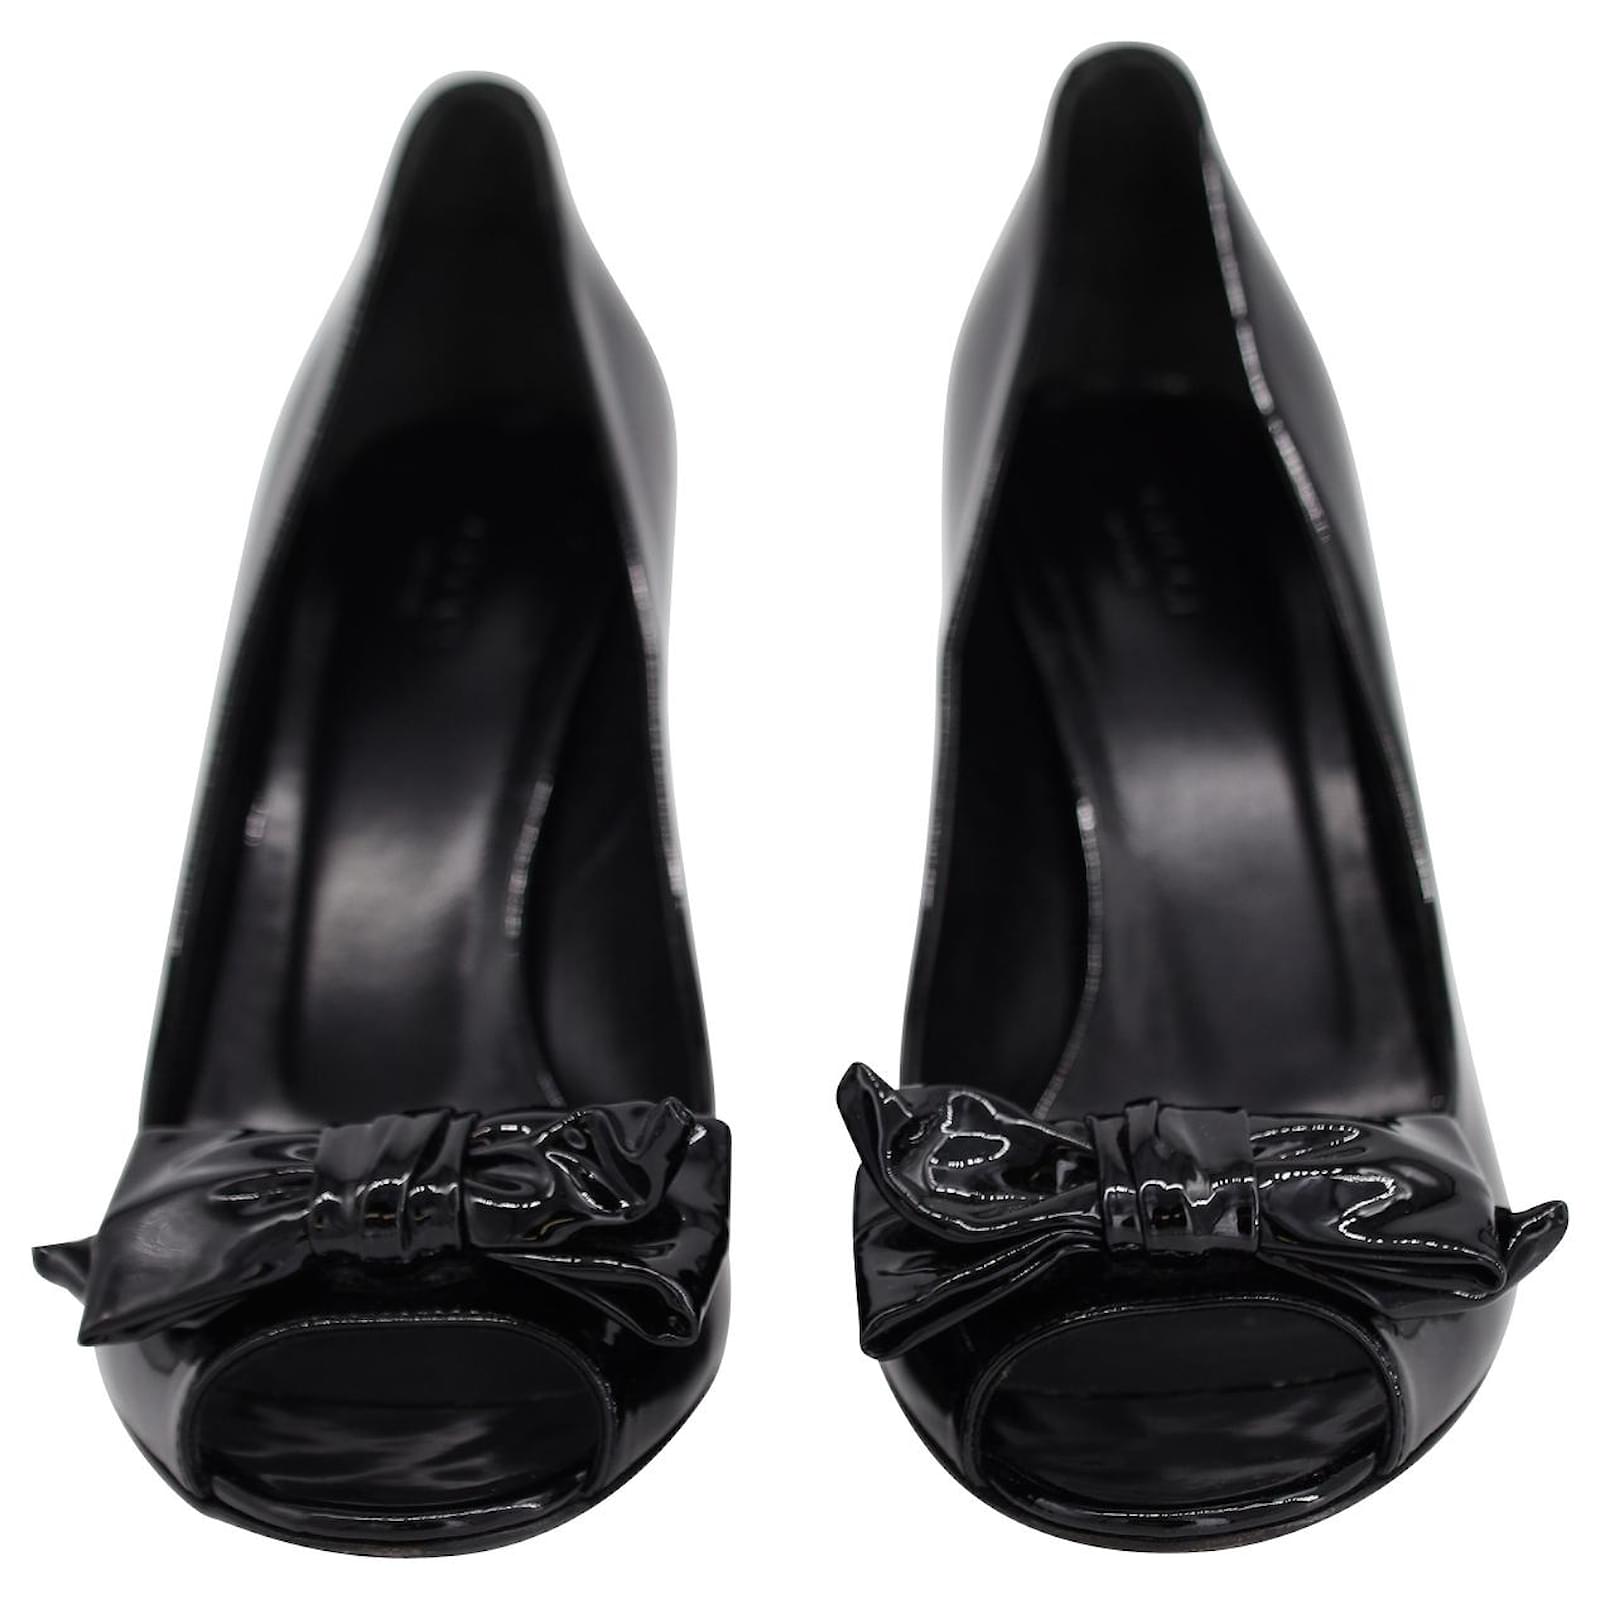 Gucci Vernice Crystal Bow Detailed Peep Toe Pumps in Black Patent ...